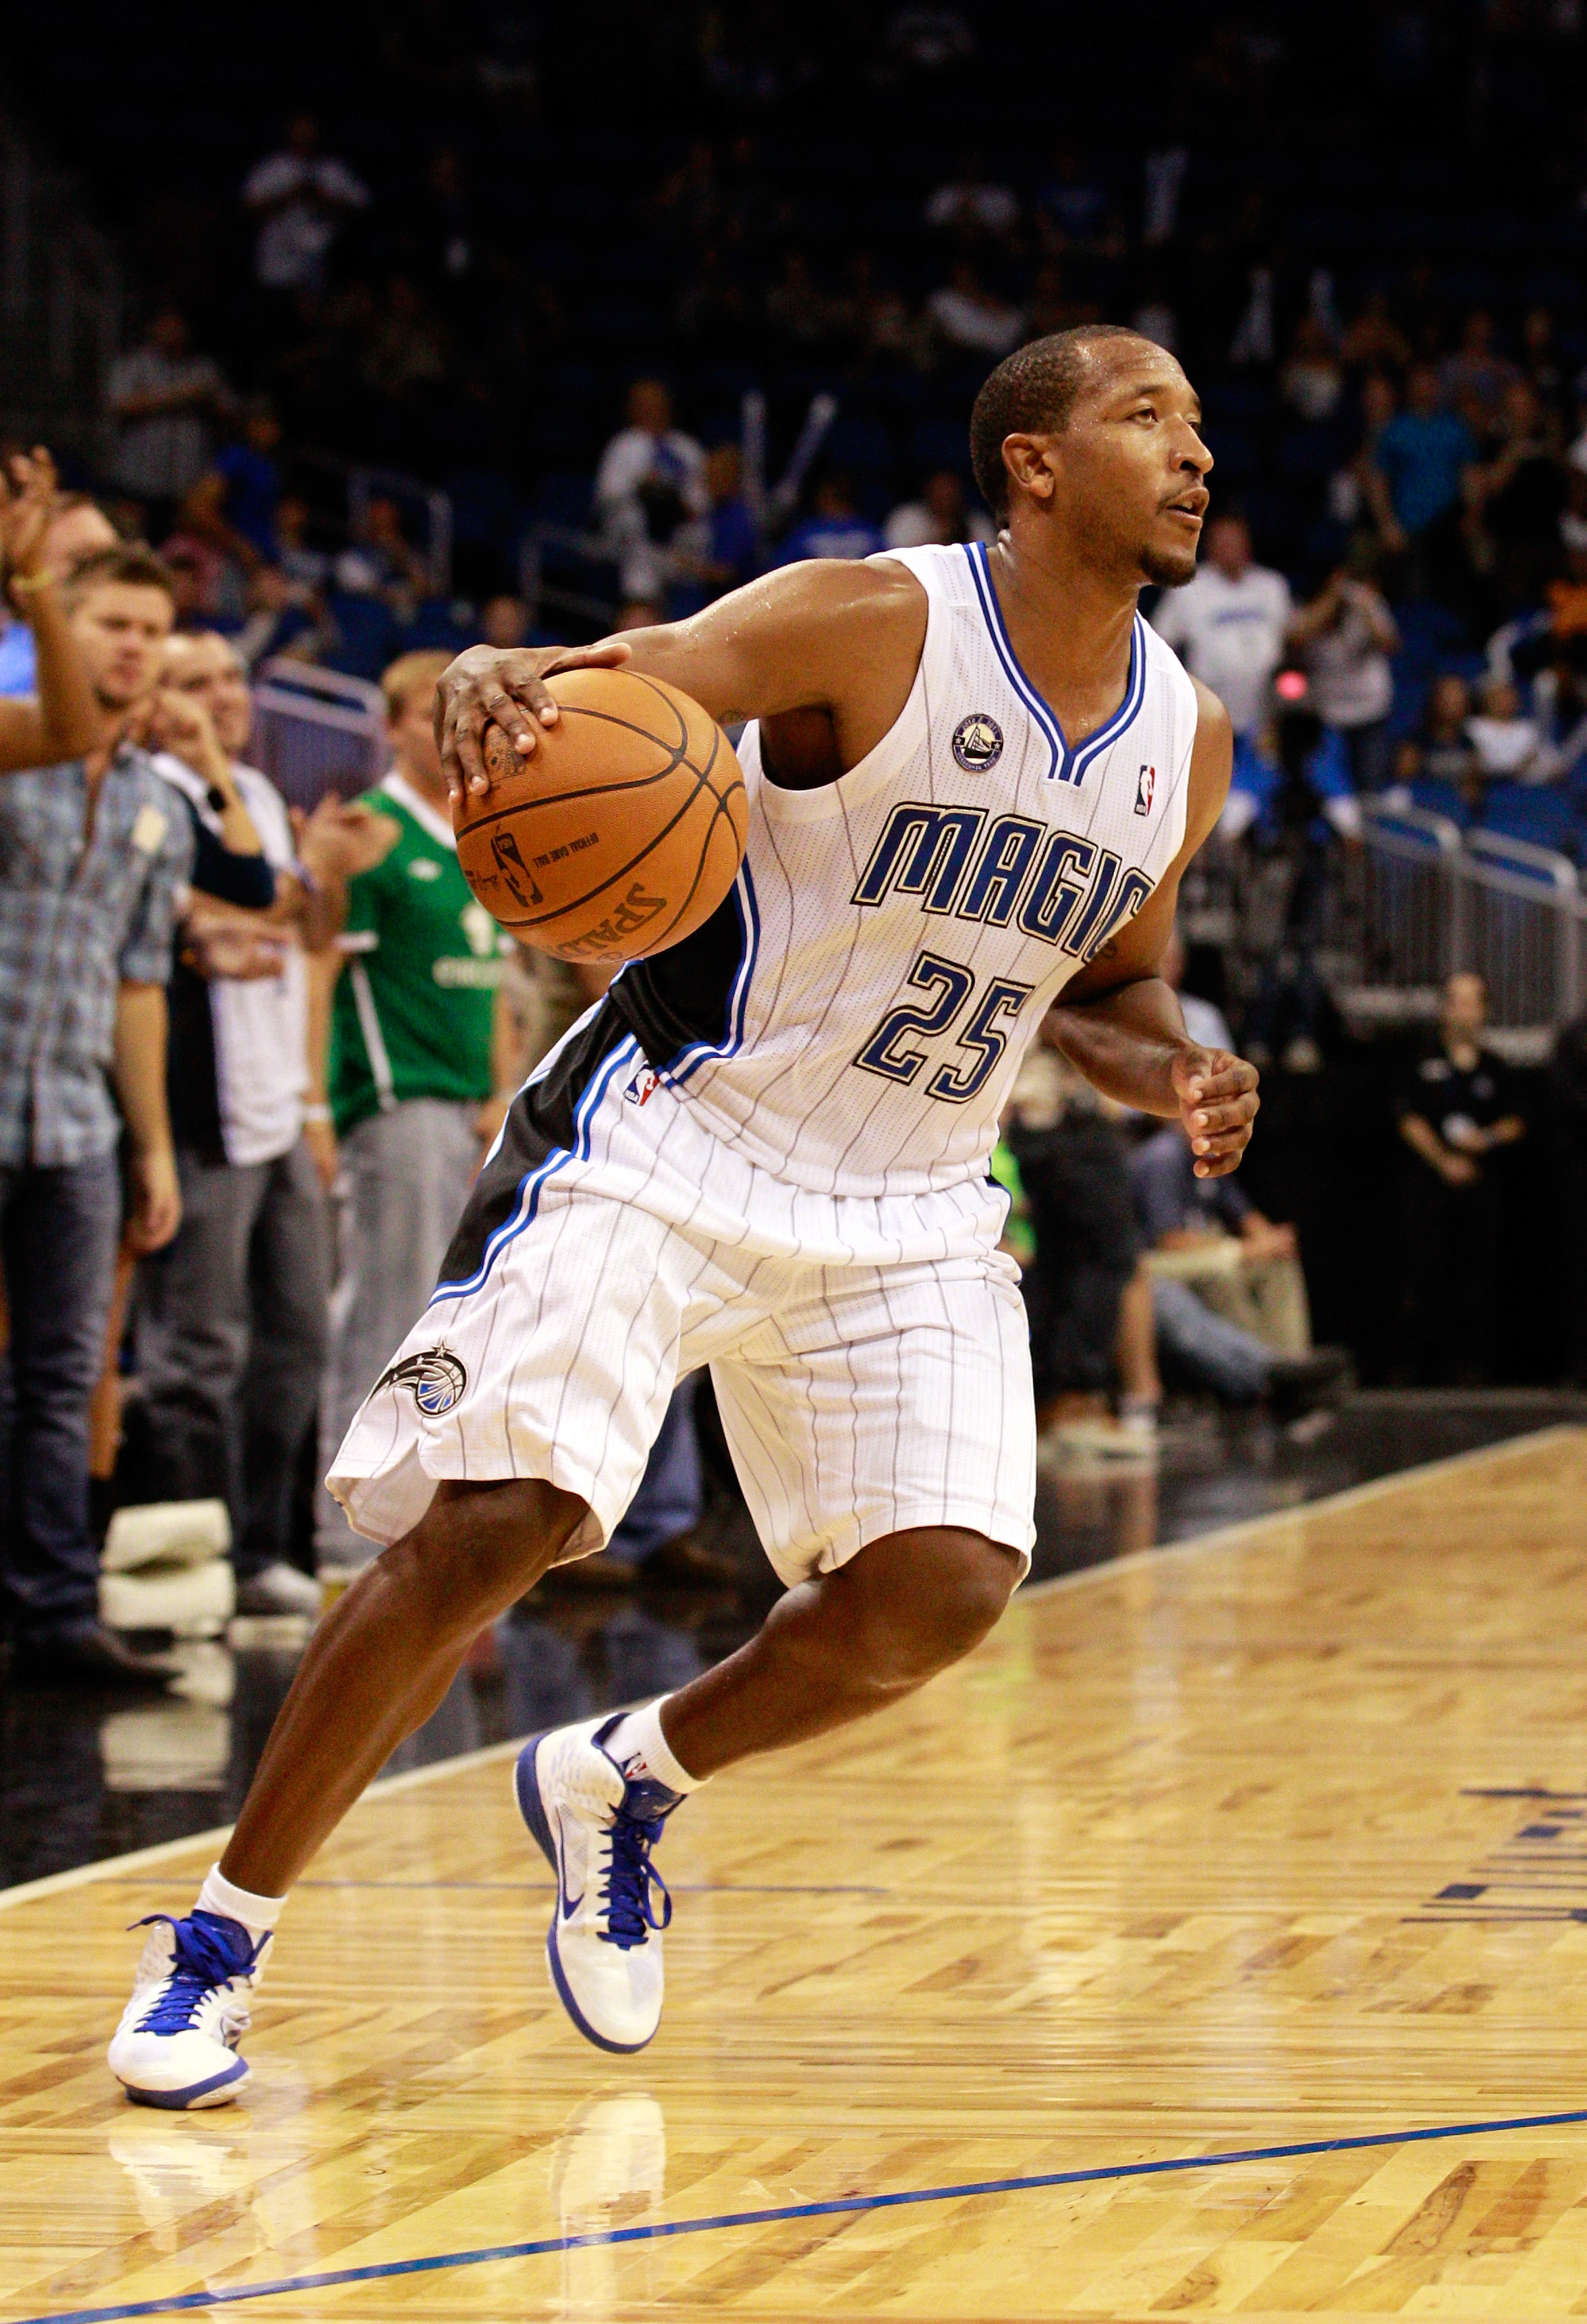 ORLANDO, FL - OCTOBER 10:  Chris Duhon #25 of the Orlando Magic dribbles during the game against the New Orleans Hornets at Amway Arena on October 10, 2010 in Orlando, Florida. NOTE TO USER: User expressly acknowledges and agrees that, by downloading and